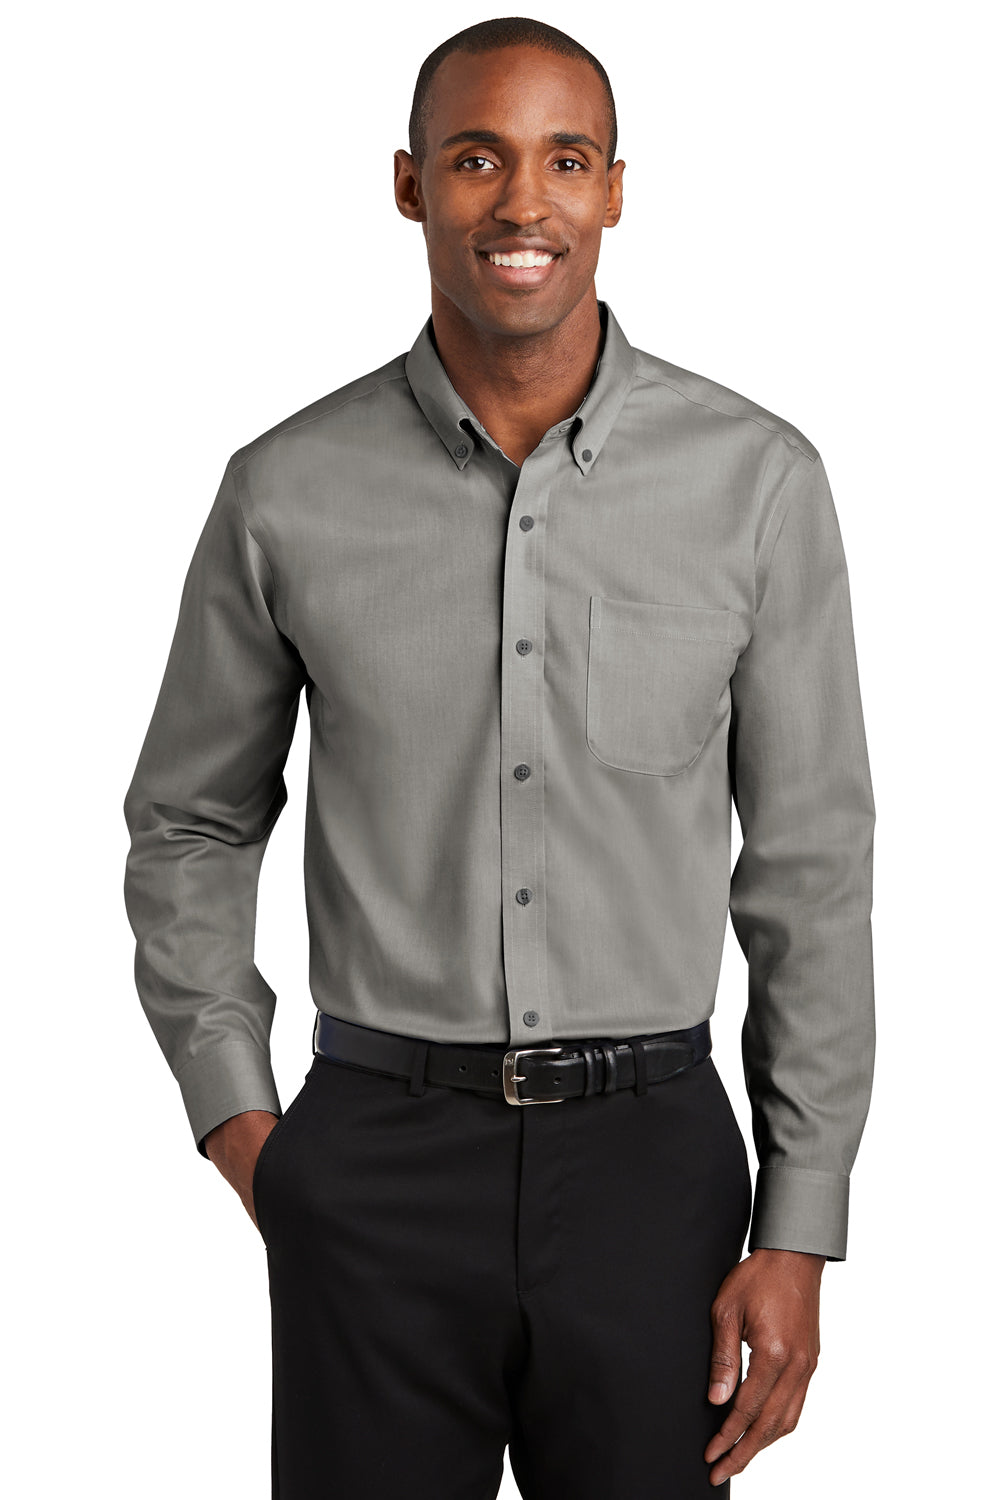 Red House RH240 Mens Pinpoint Oxford Wrinkle Resistant Long Sleeve Button Down Shirt w/ Pocket Charcoal Grey Front